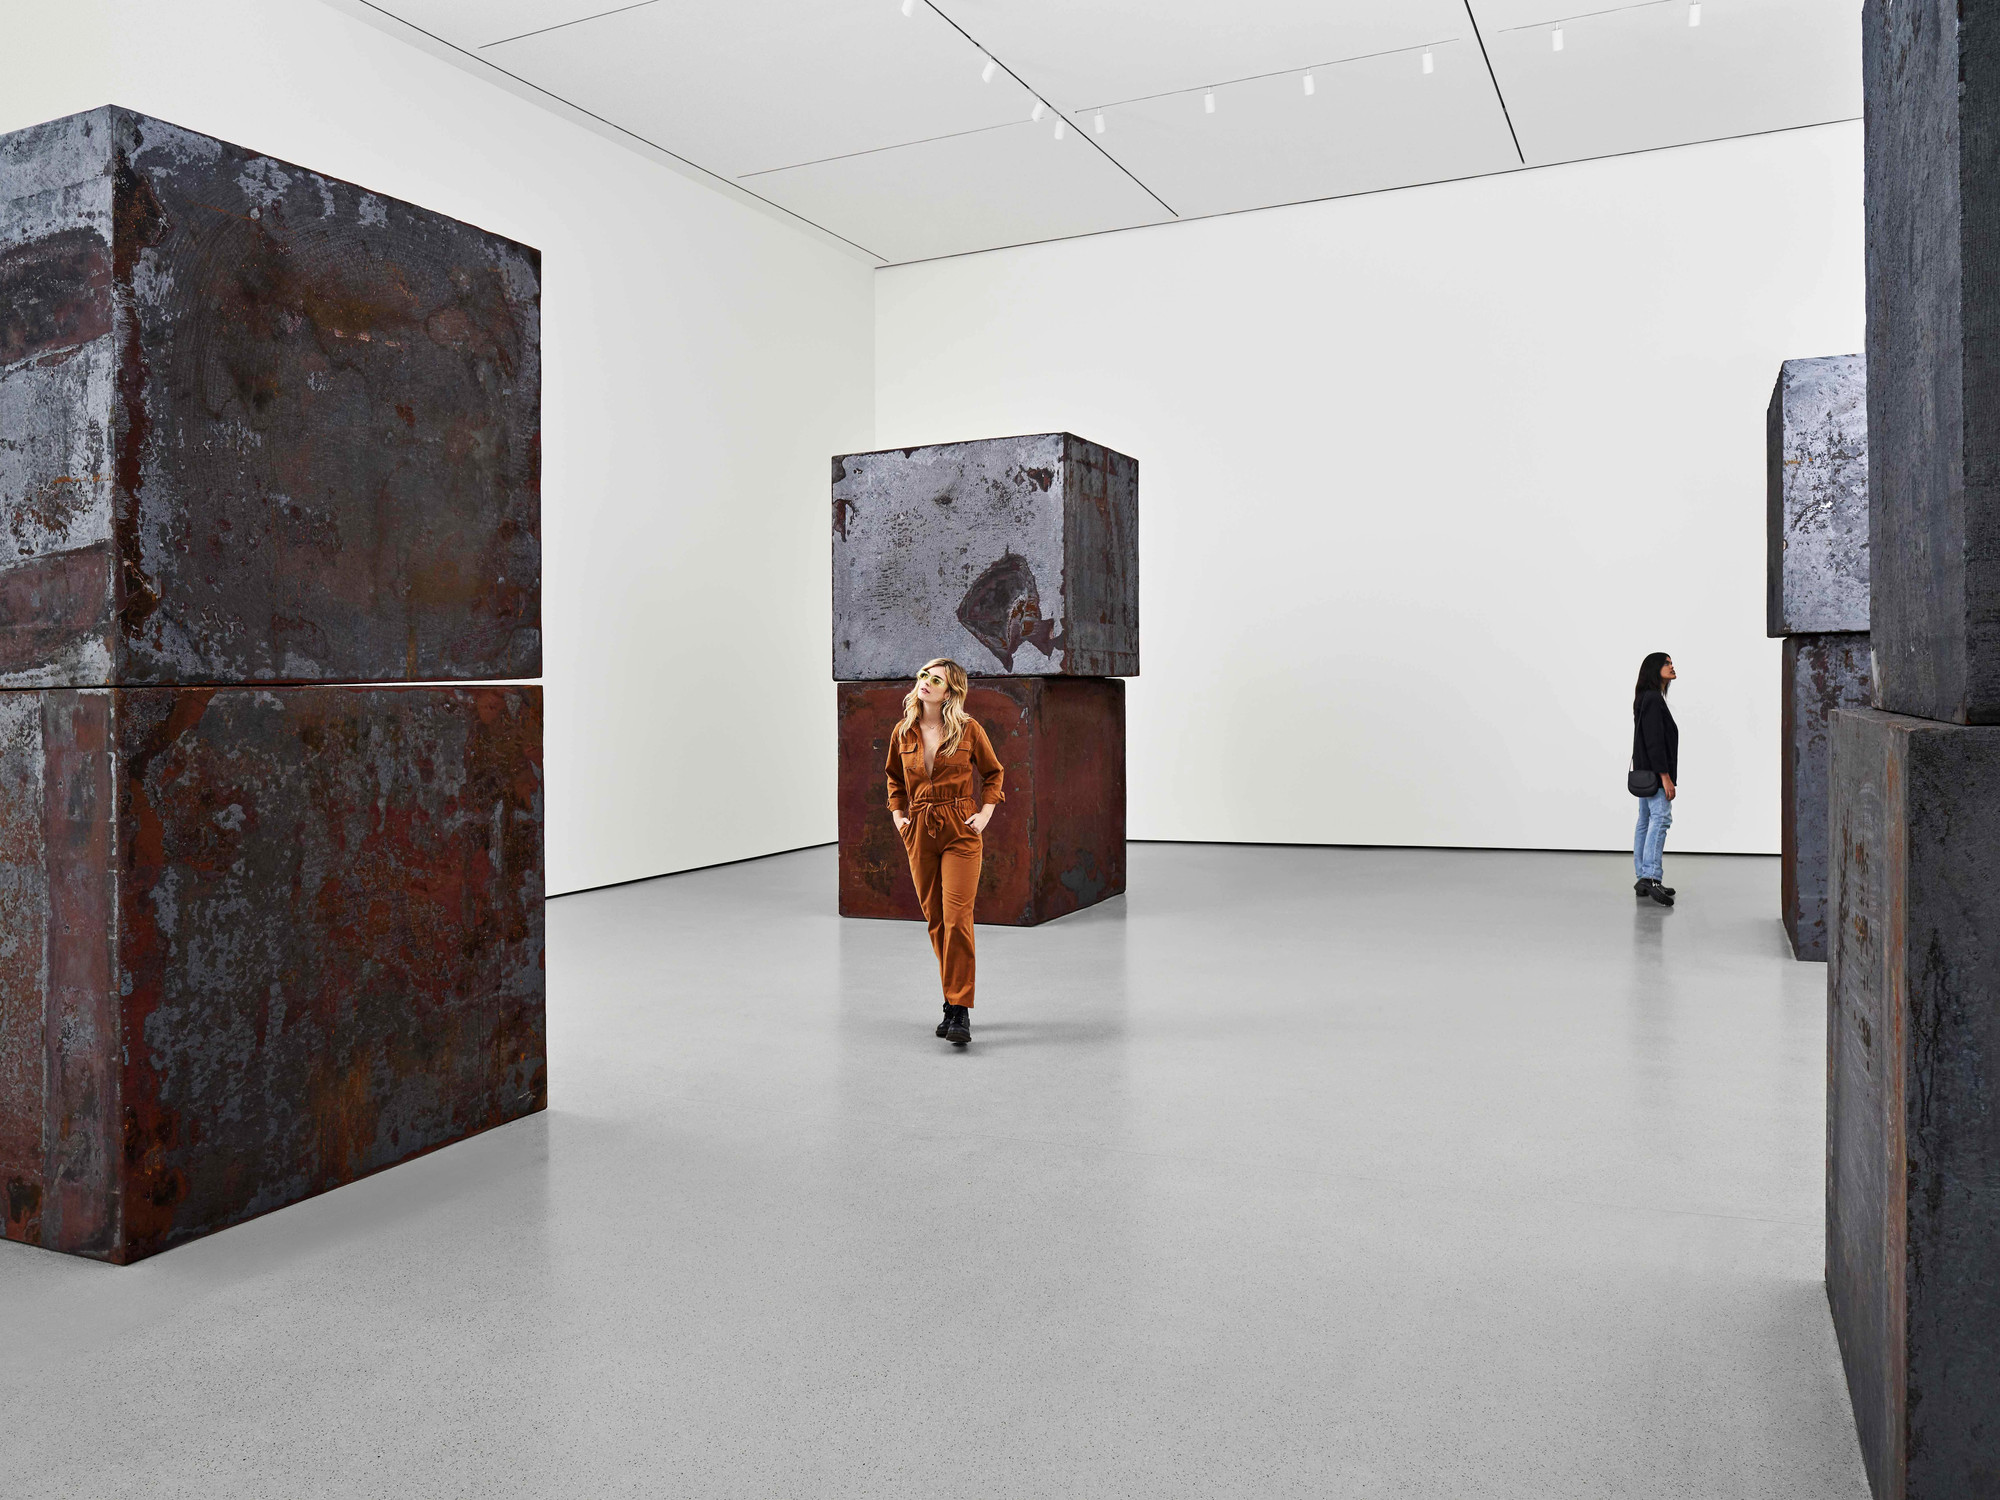 A view of the second-floor collection galleries. Shown: Richard Serra. Equal. 2015. Forged weatherproof steel. Gift of Sidney and Harriet Janis (by exchange), Enid A. Haupt Fund, and Gift of William B. Jaffe and Evelyn A. J. Hall (by exchange). © 2019 Richard Serra/Artists Rights Society (ARS), New York